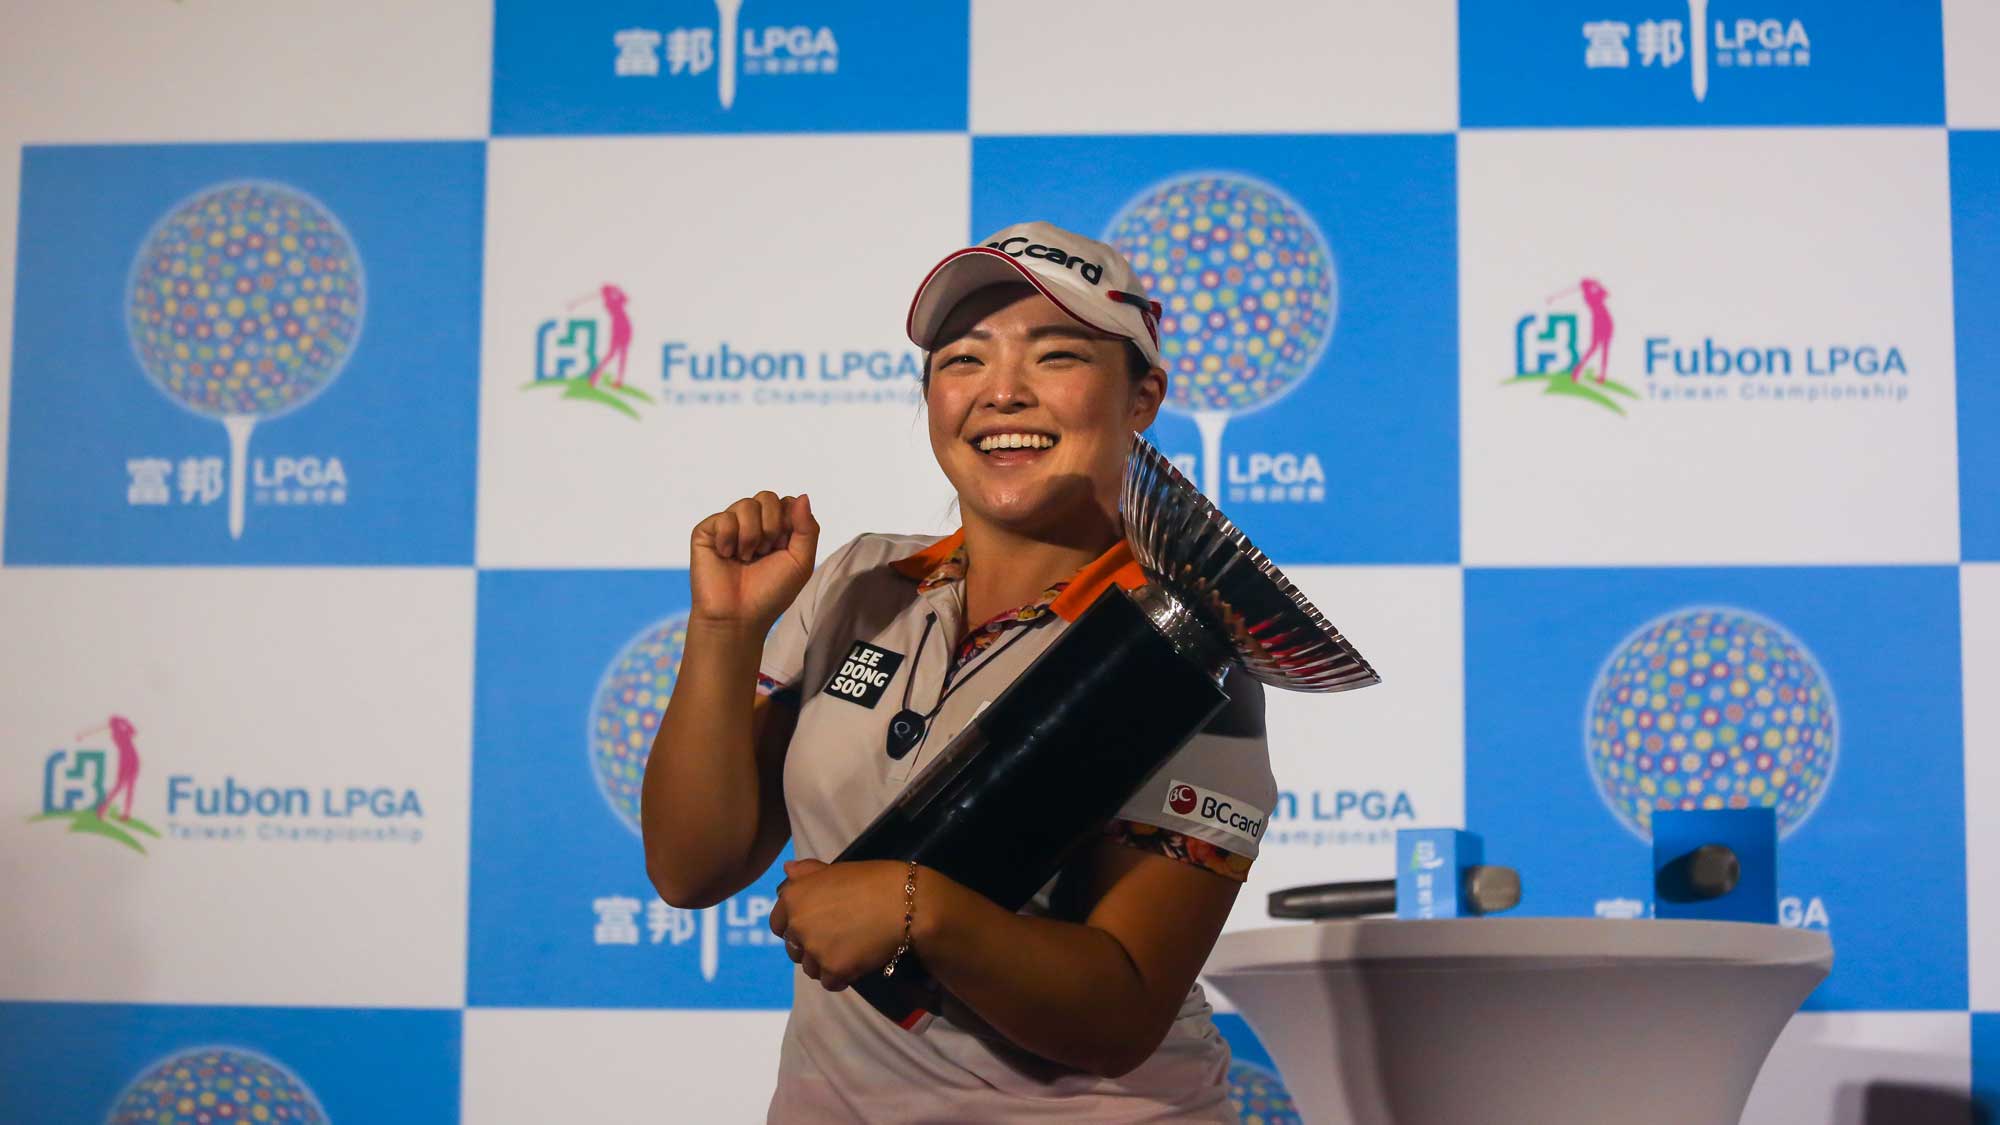 Ha Na Jang holds the trophy after winning the competition in the Fubon Taiwan LPGA Championship